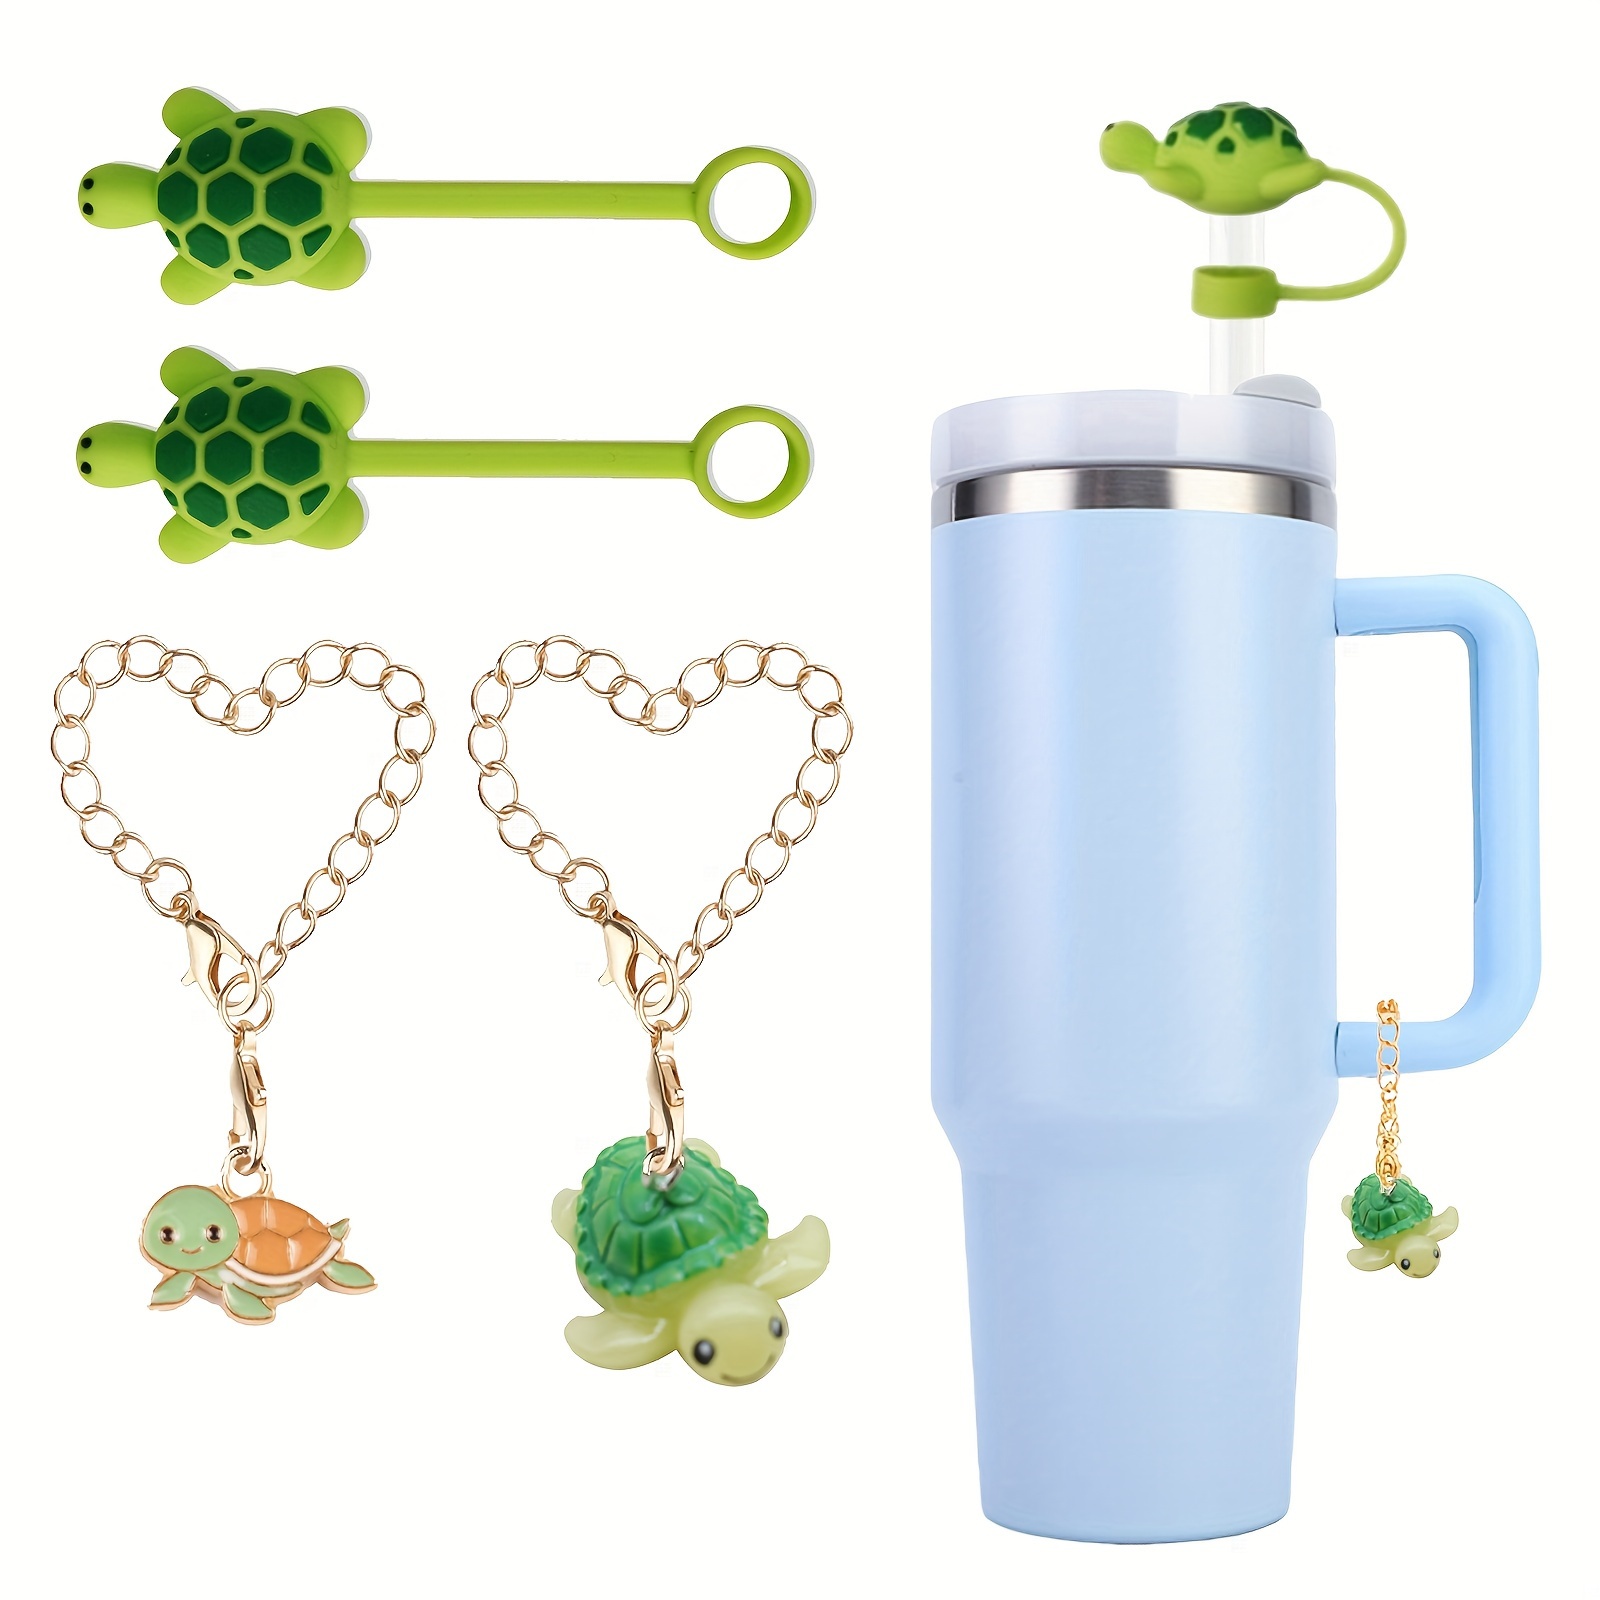 

4pcs/set, 2pcs Turtle Chain Charm Pendant And 2pcs Cute Turtle Straw Tips Cover Set For Tumbler Water Cup, Straw Cap, Creative Decorative Pendant For Water